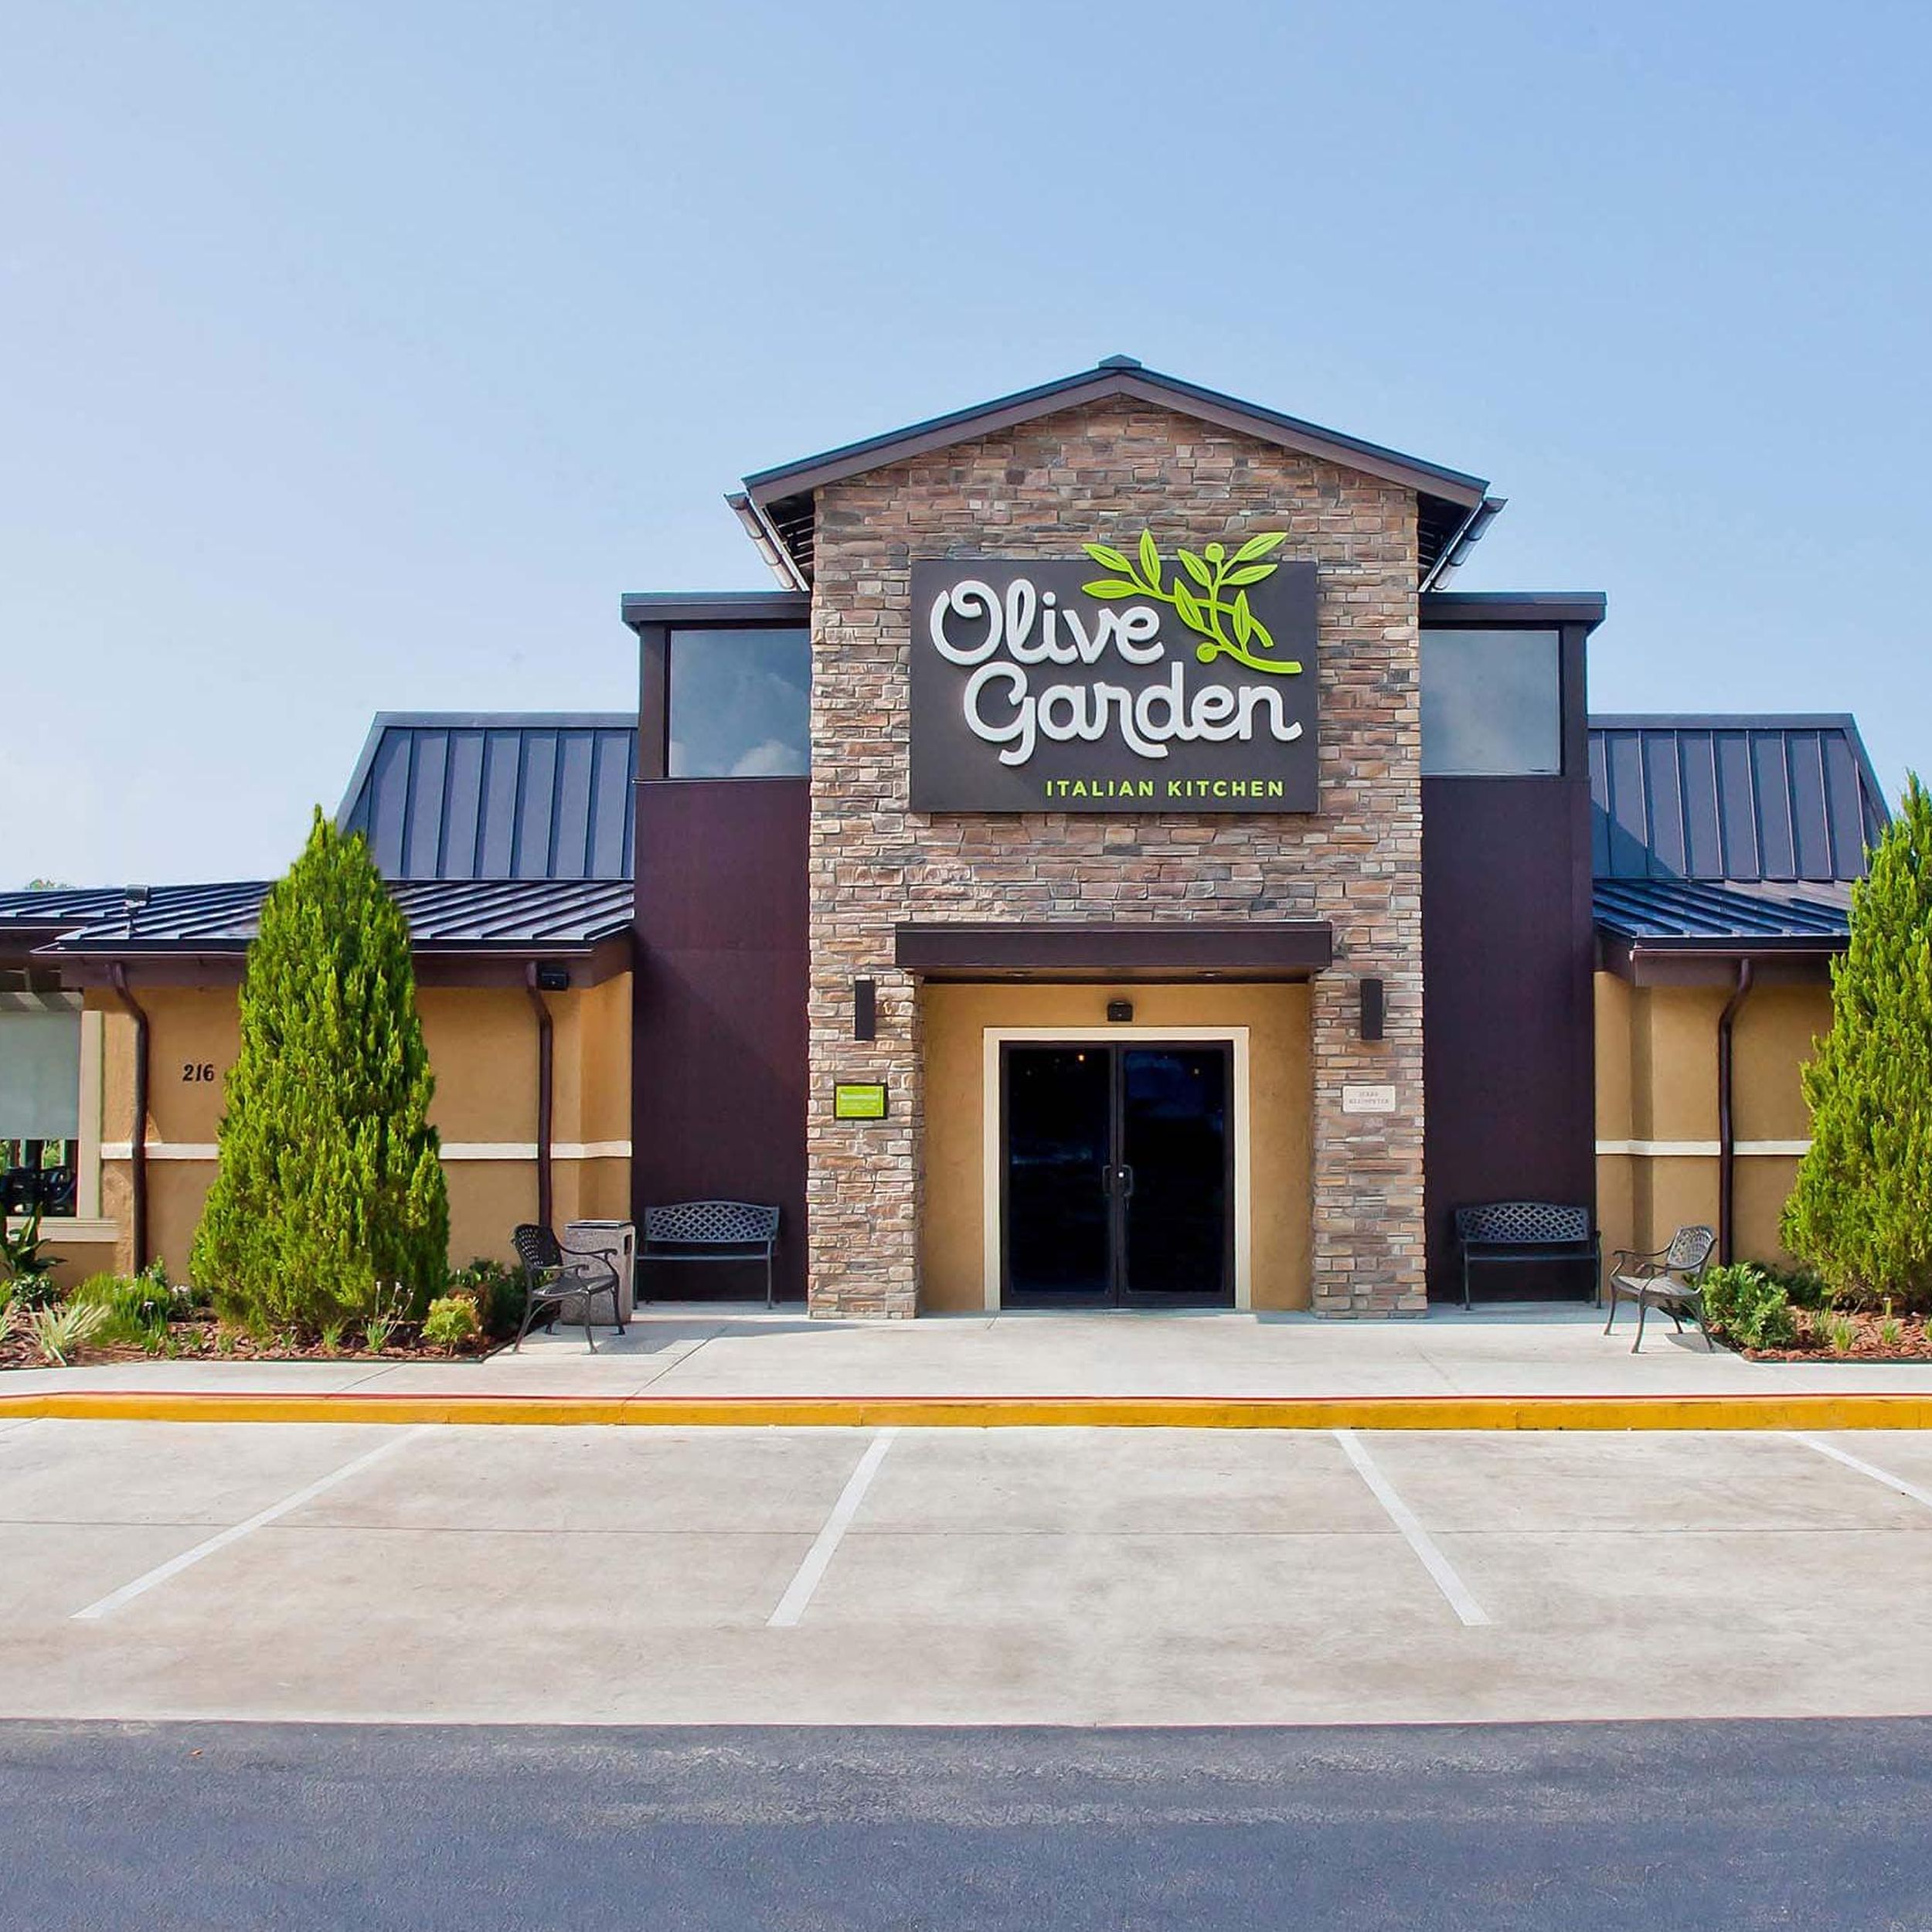 Olive Garden Moves Forward With Building Permits For Restaurant In Spokane Valley The Spokesman Review